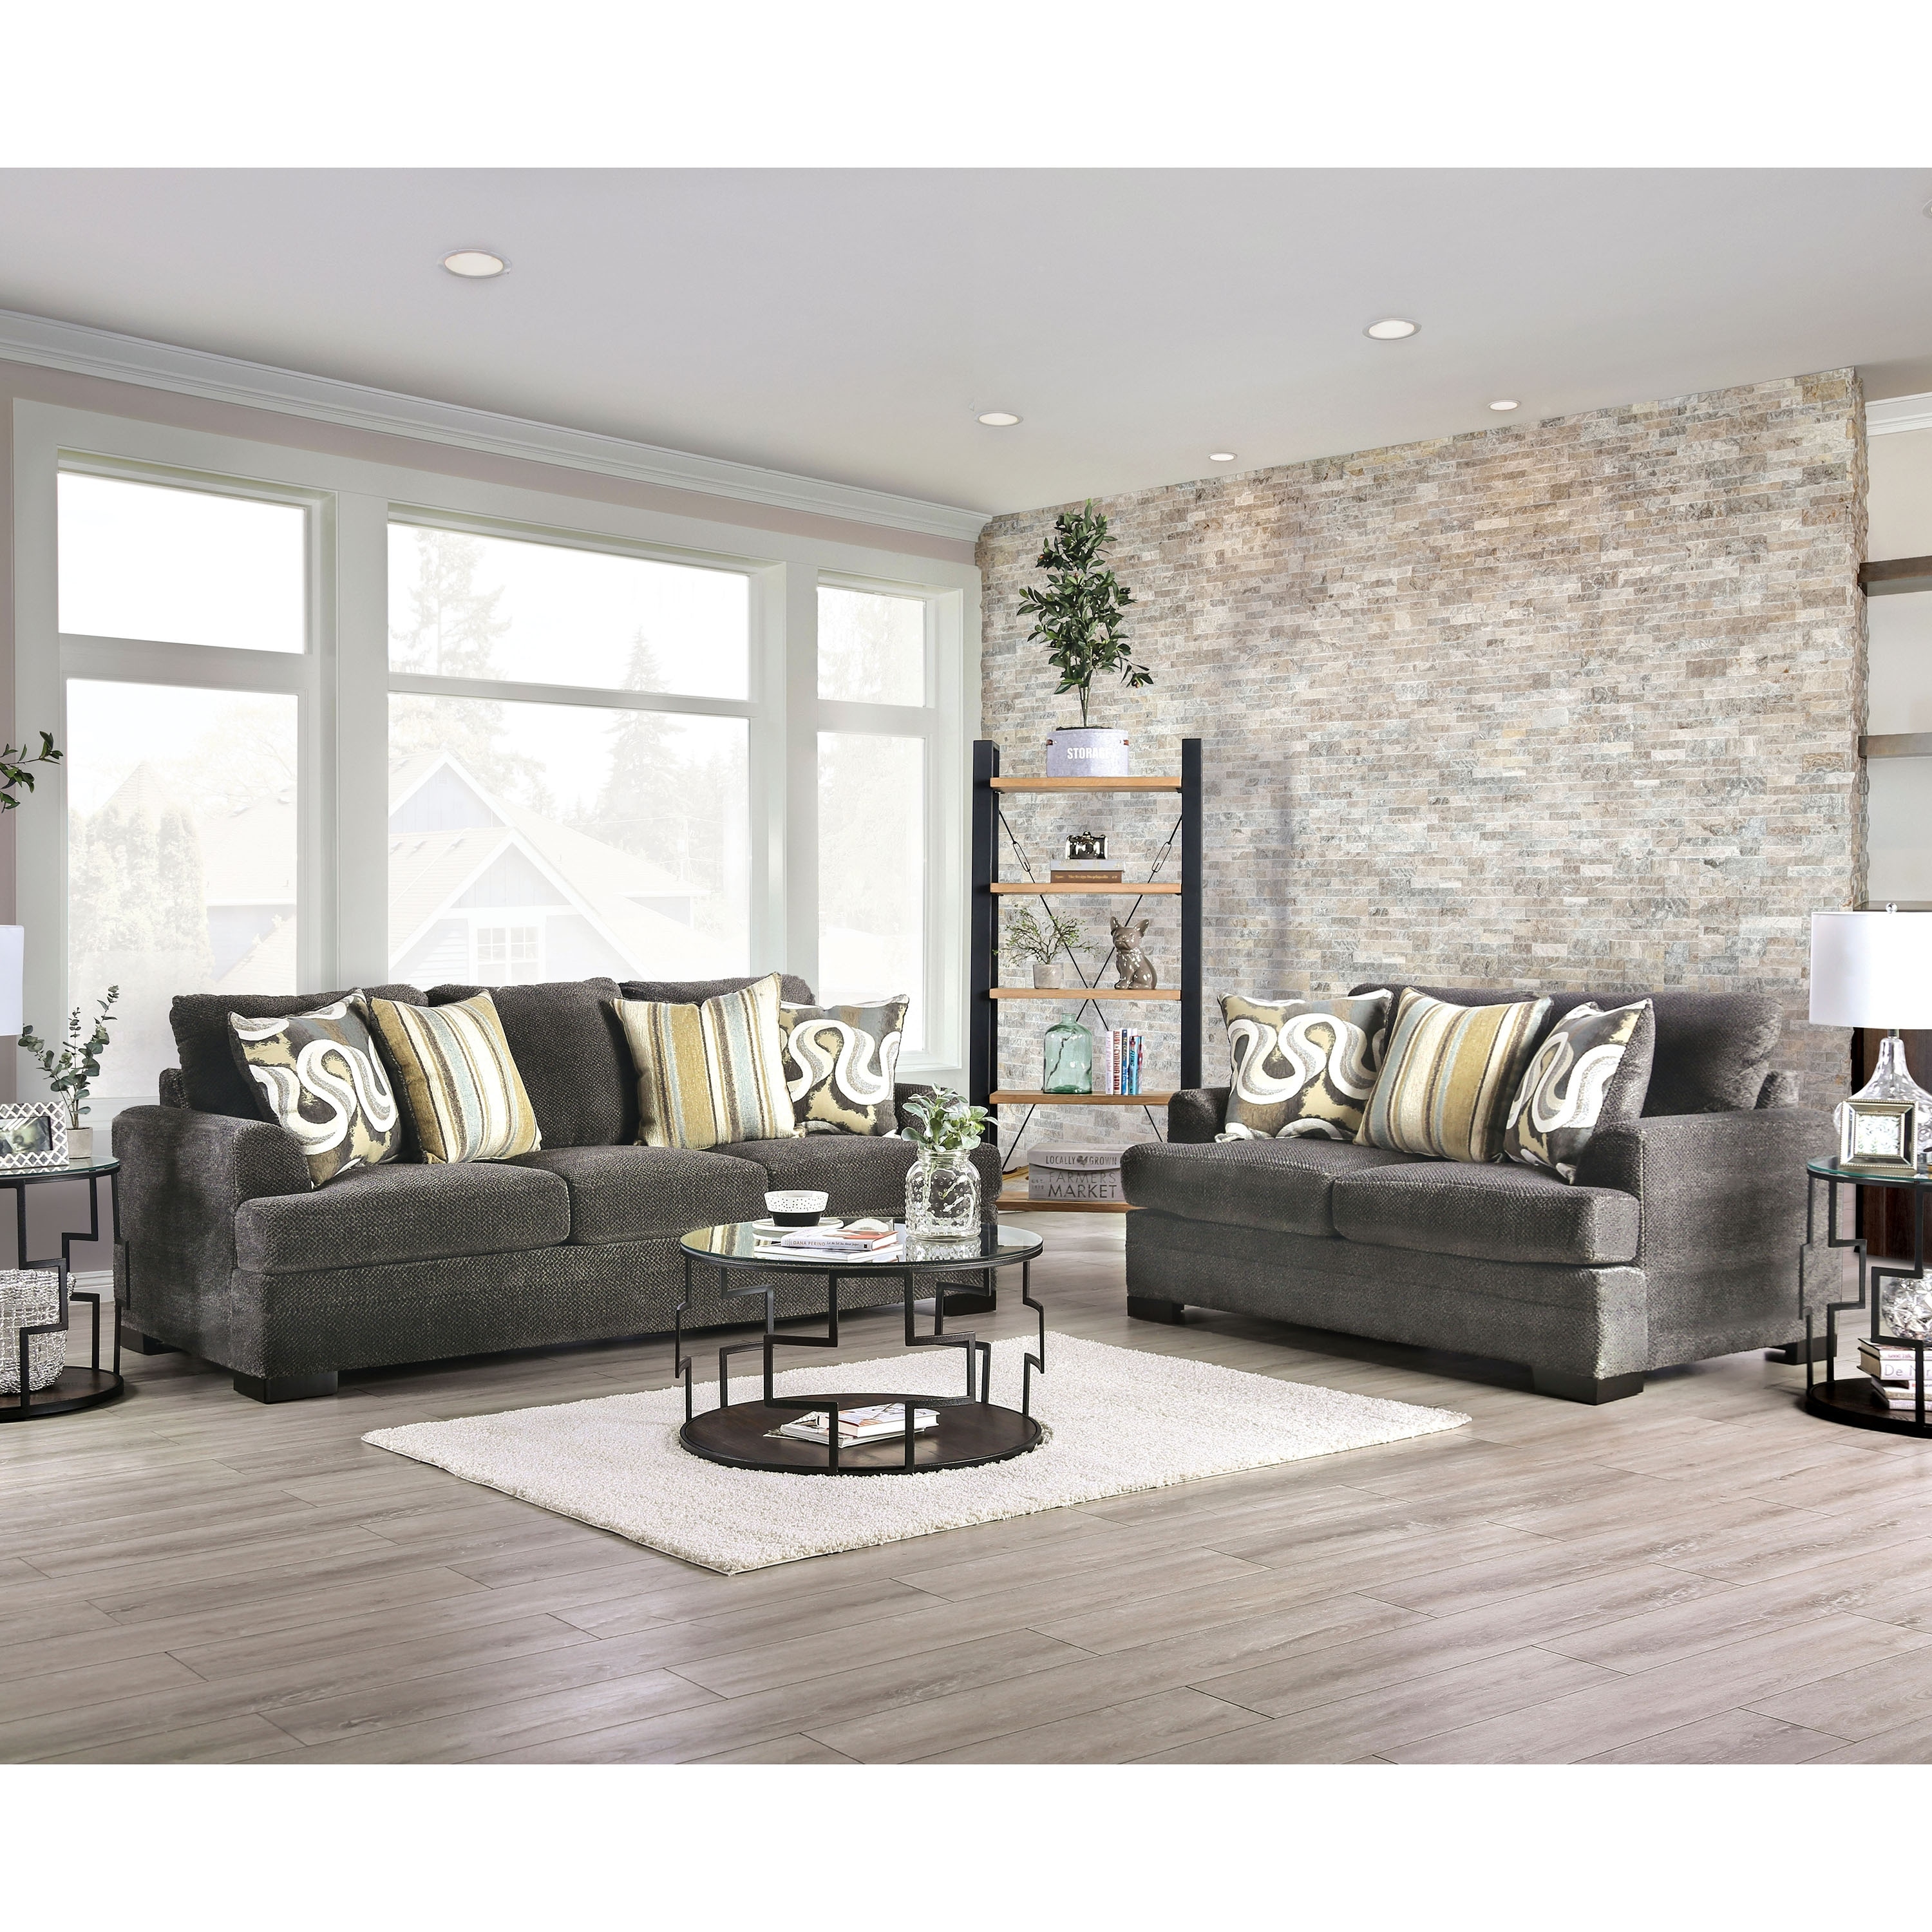 Furniture Of America Klio Transitional Chenille 2 Piece Living Room Set Overstock 31470880